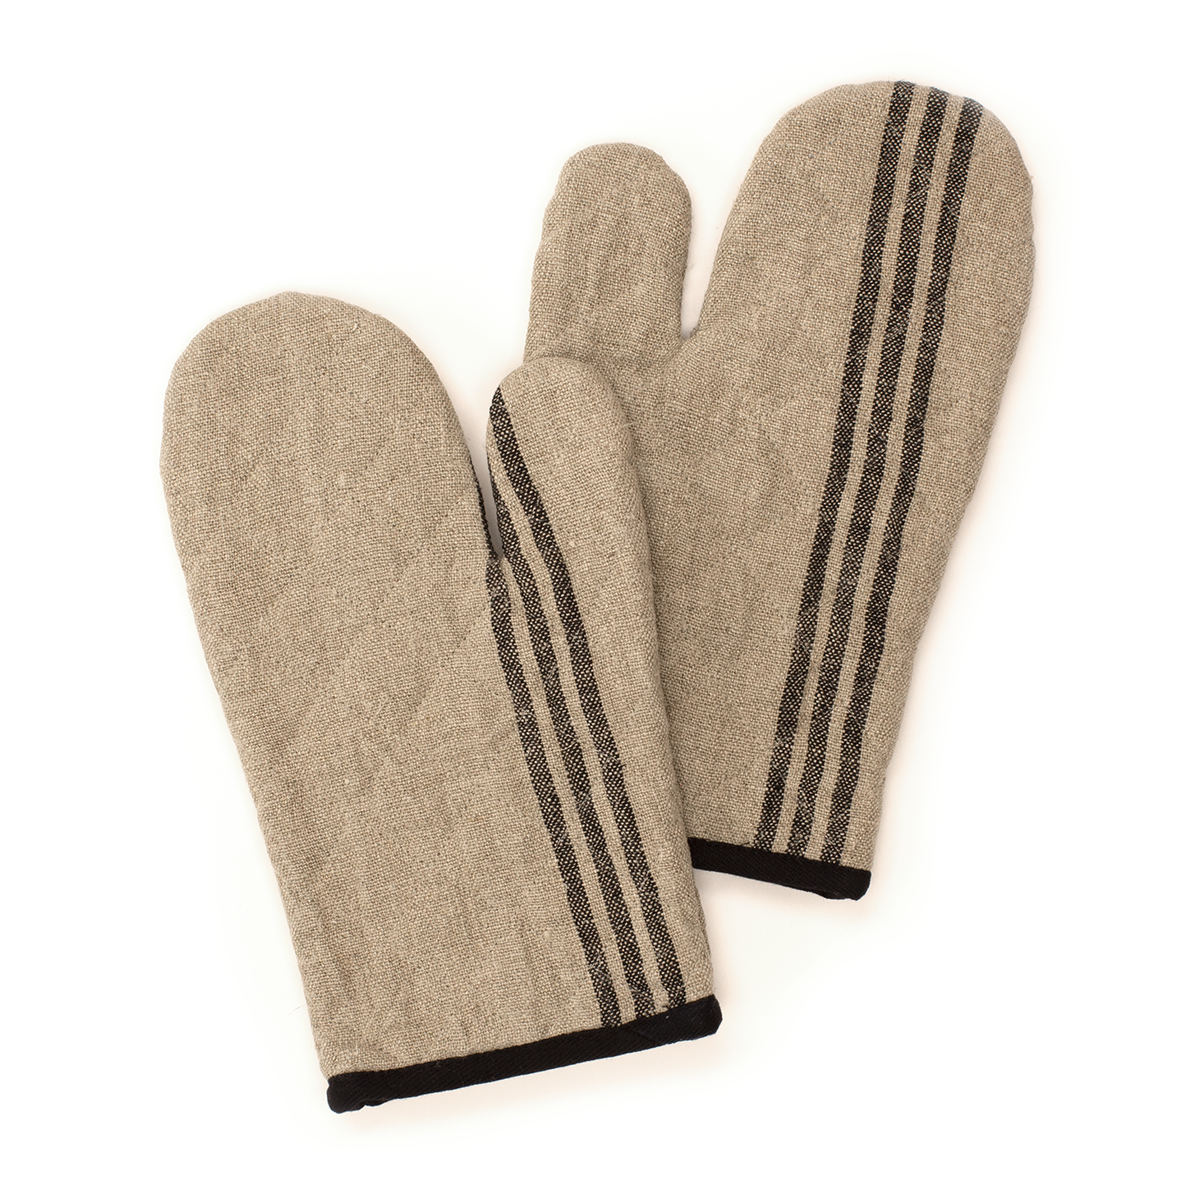 Oven mitts 